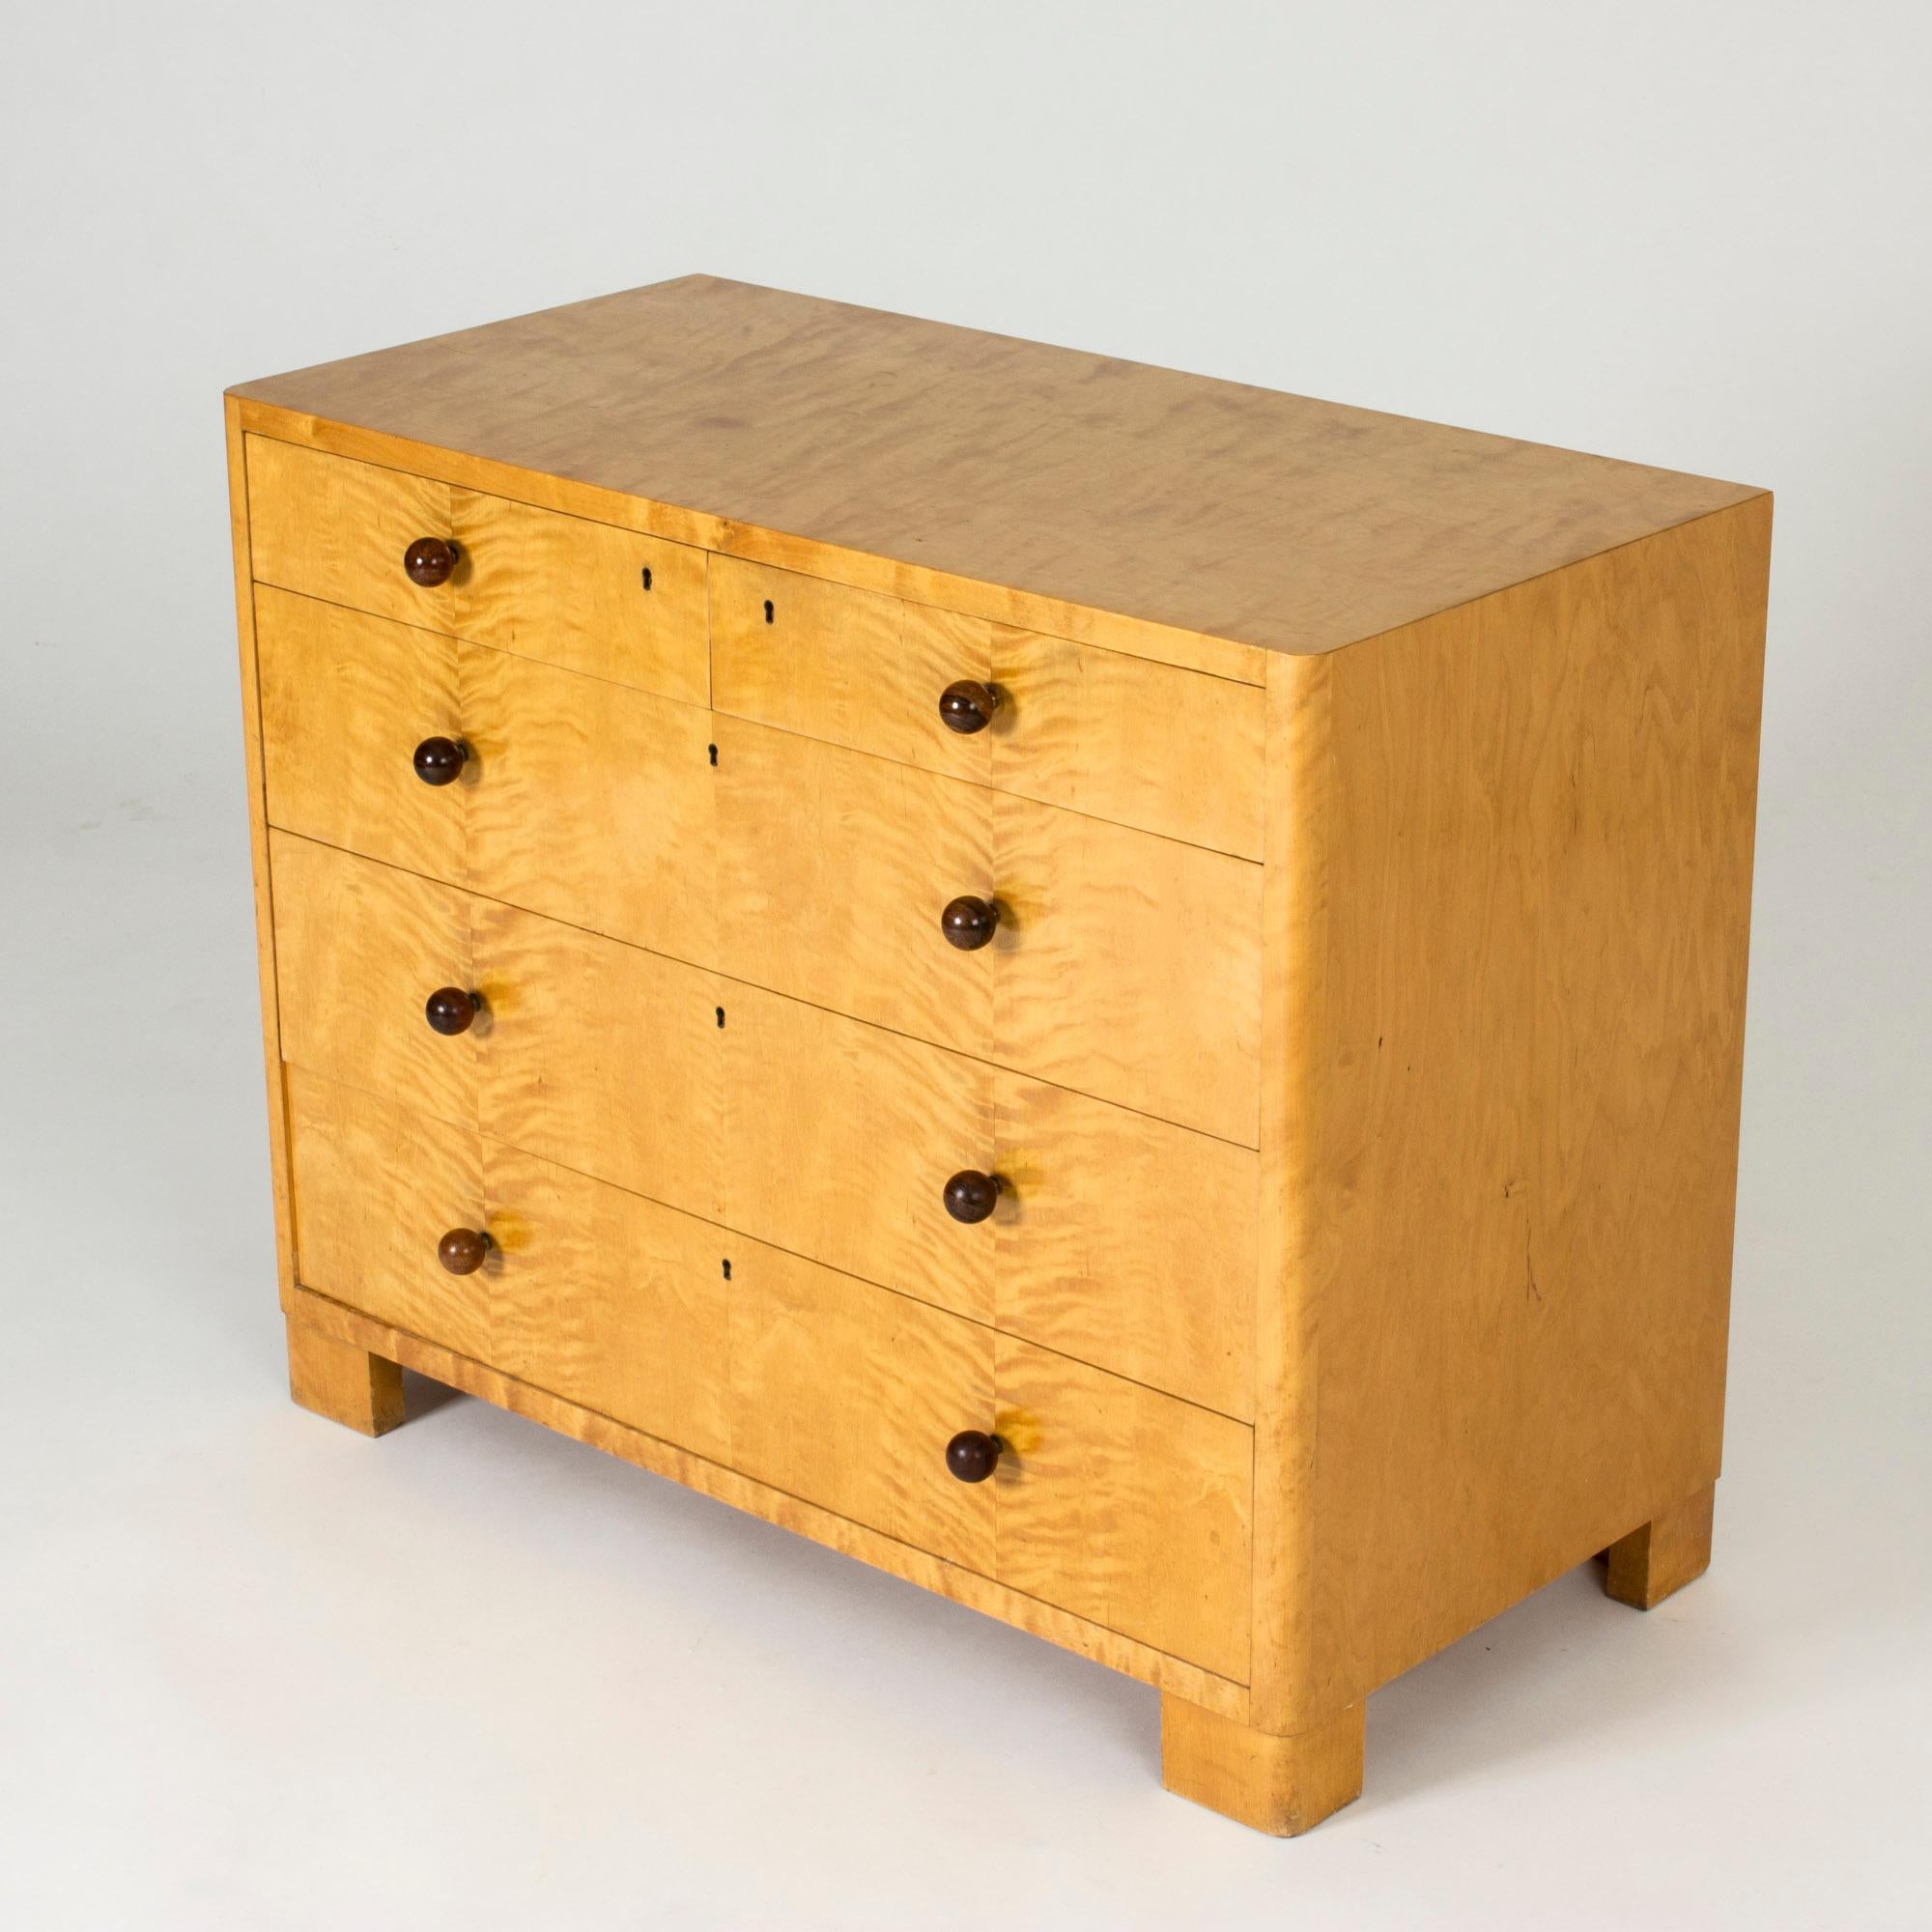 Amazing functionalist chest of drawers by Axel Larsson, made in from birch with round darker wood knobs on the drawers. Clean lines, chunky square legs.